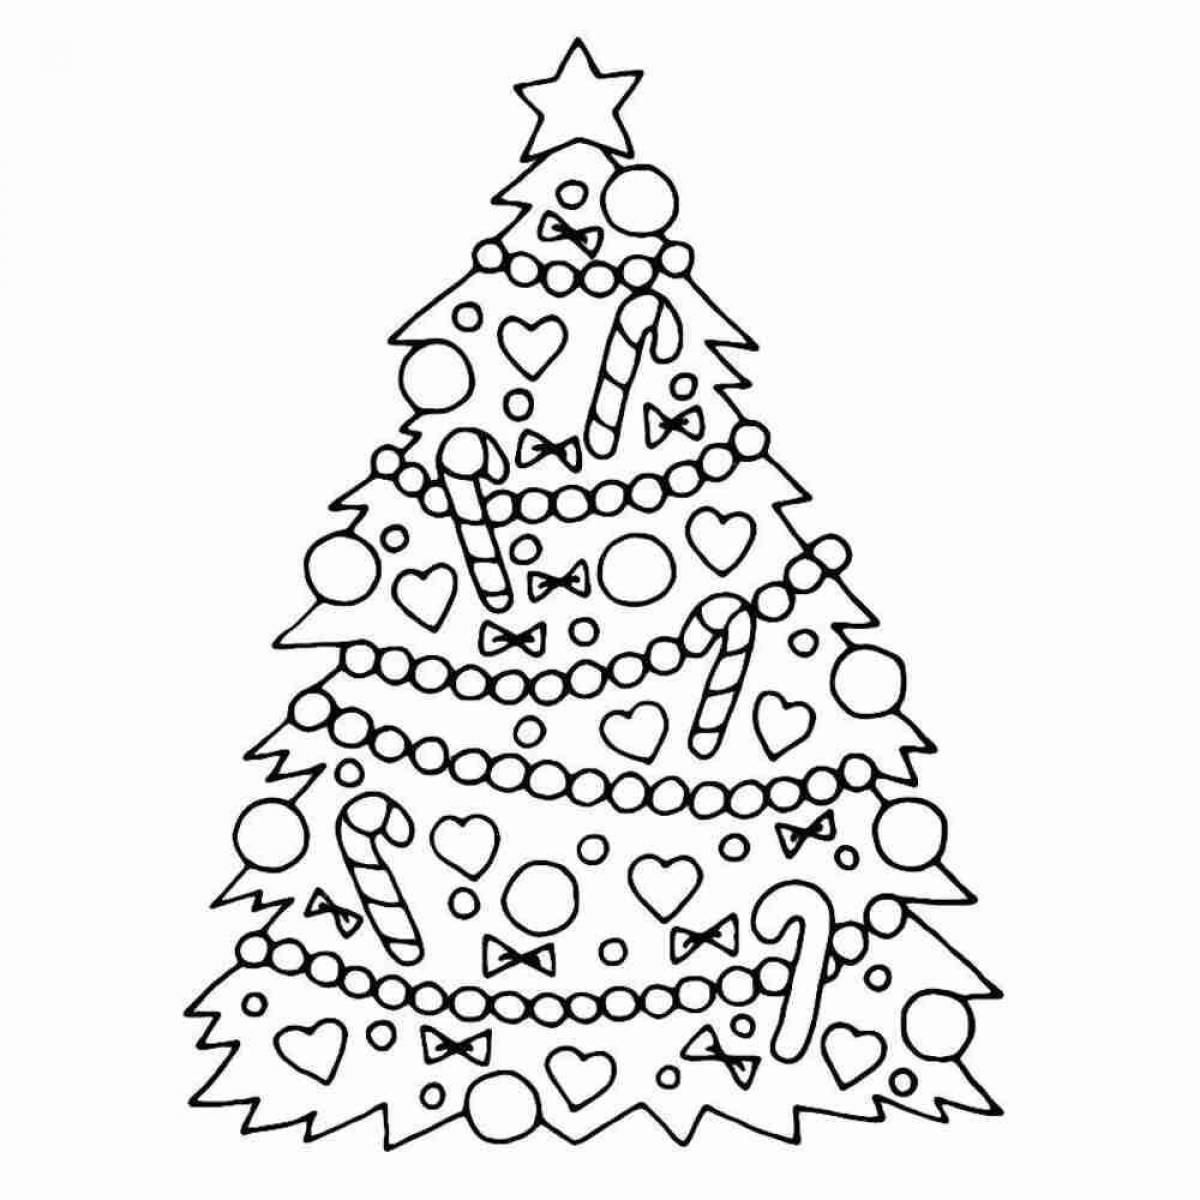 Awesome christmas tree coloring page